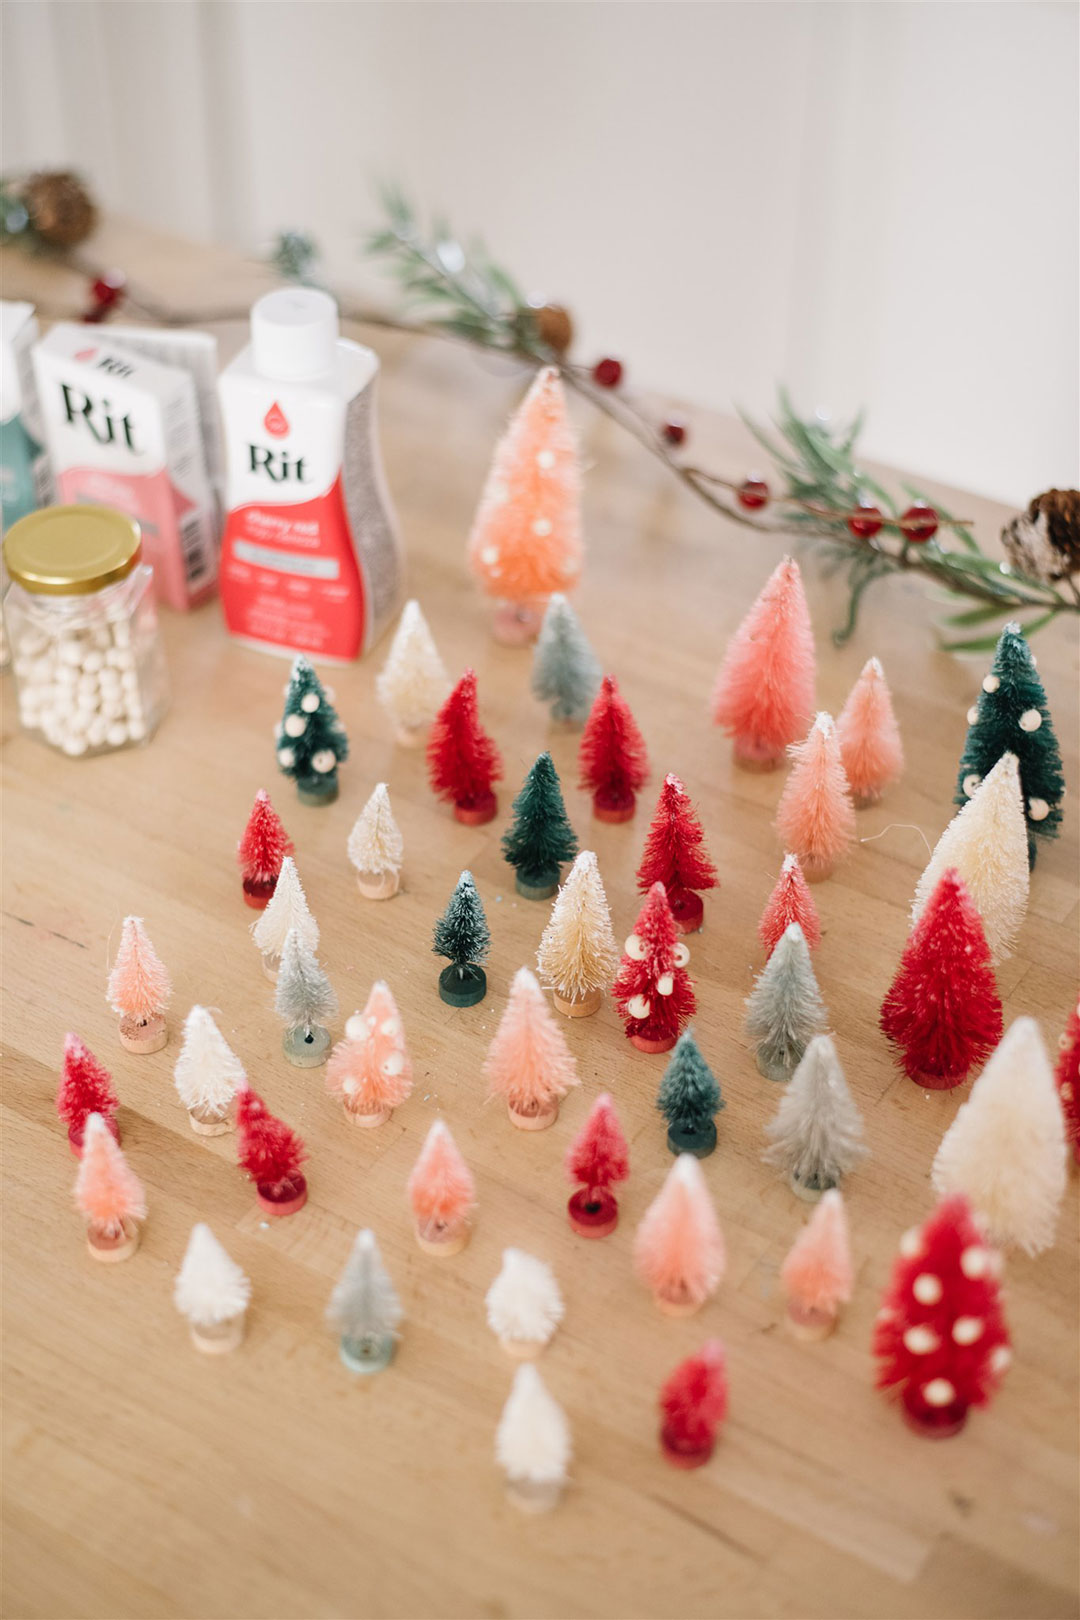 How to dye bottle brush trees in the cutest colours for Christmas!